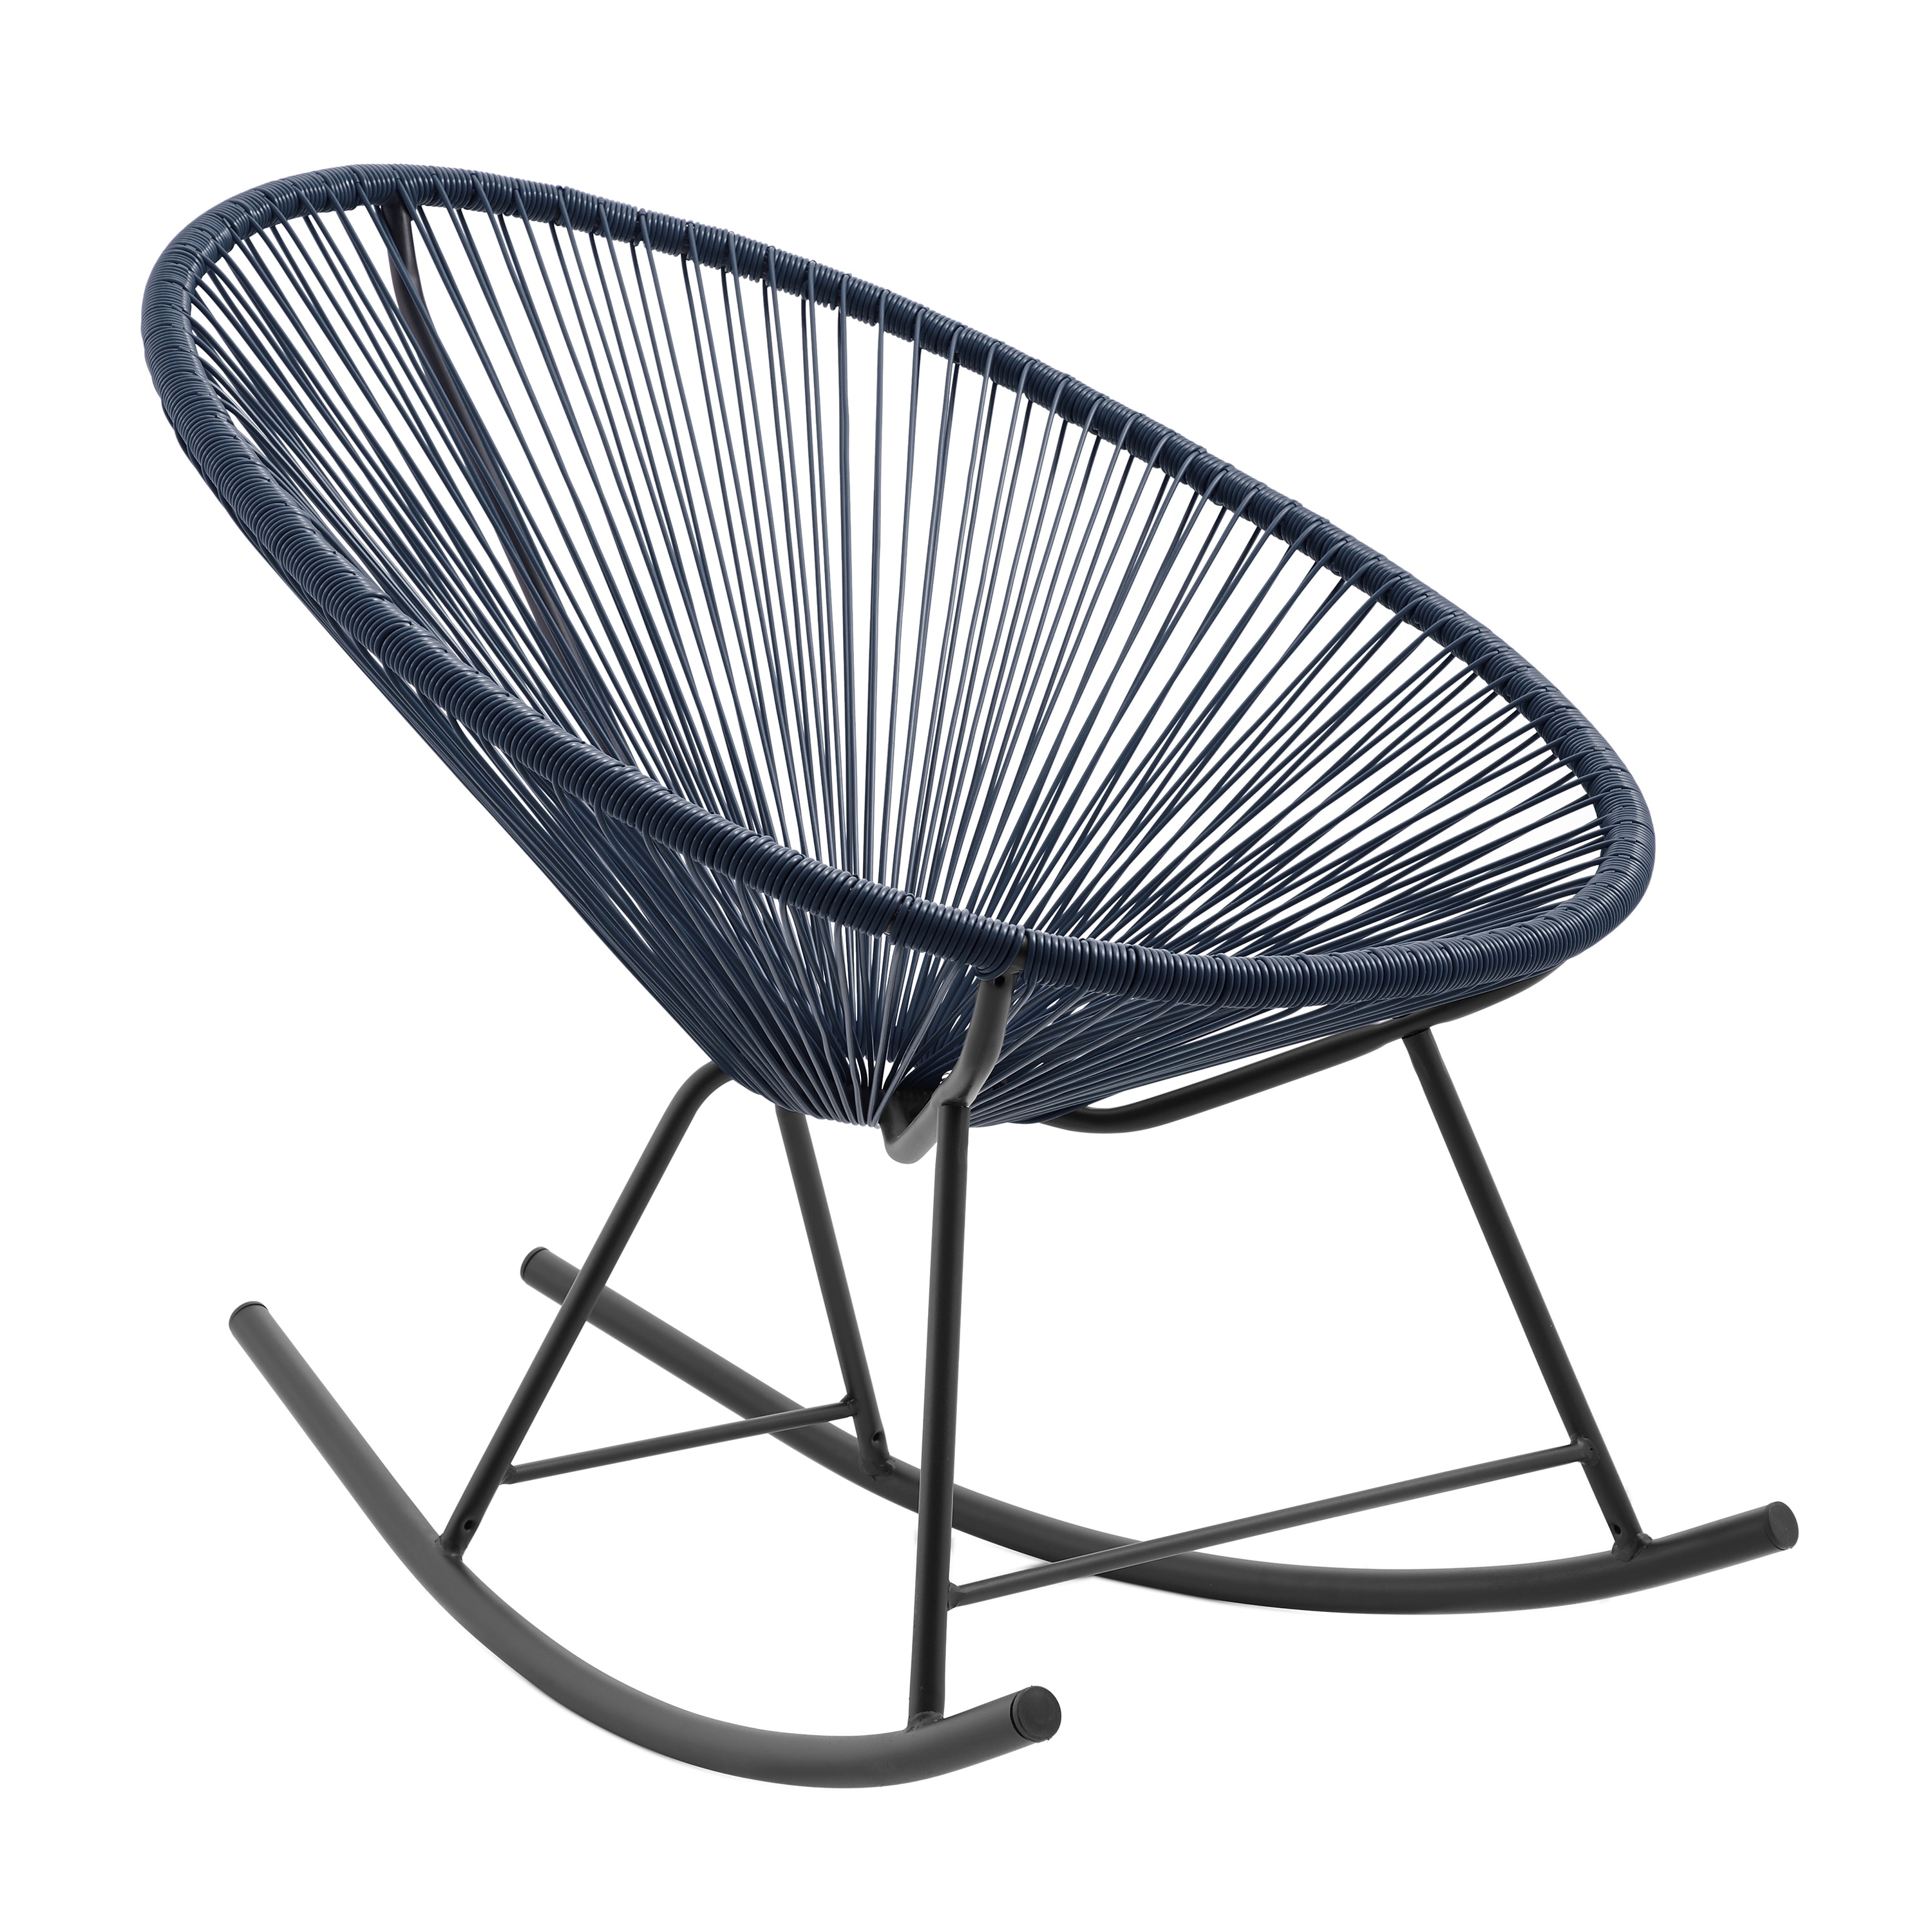 Corvus Sarcelles Modern Wicker Patio Rocking Chairs (set Of 2)